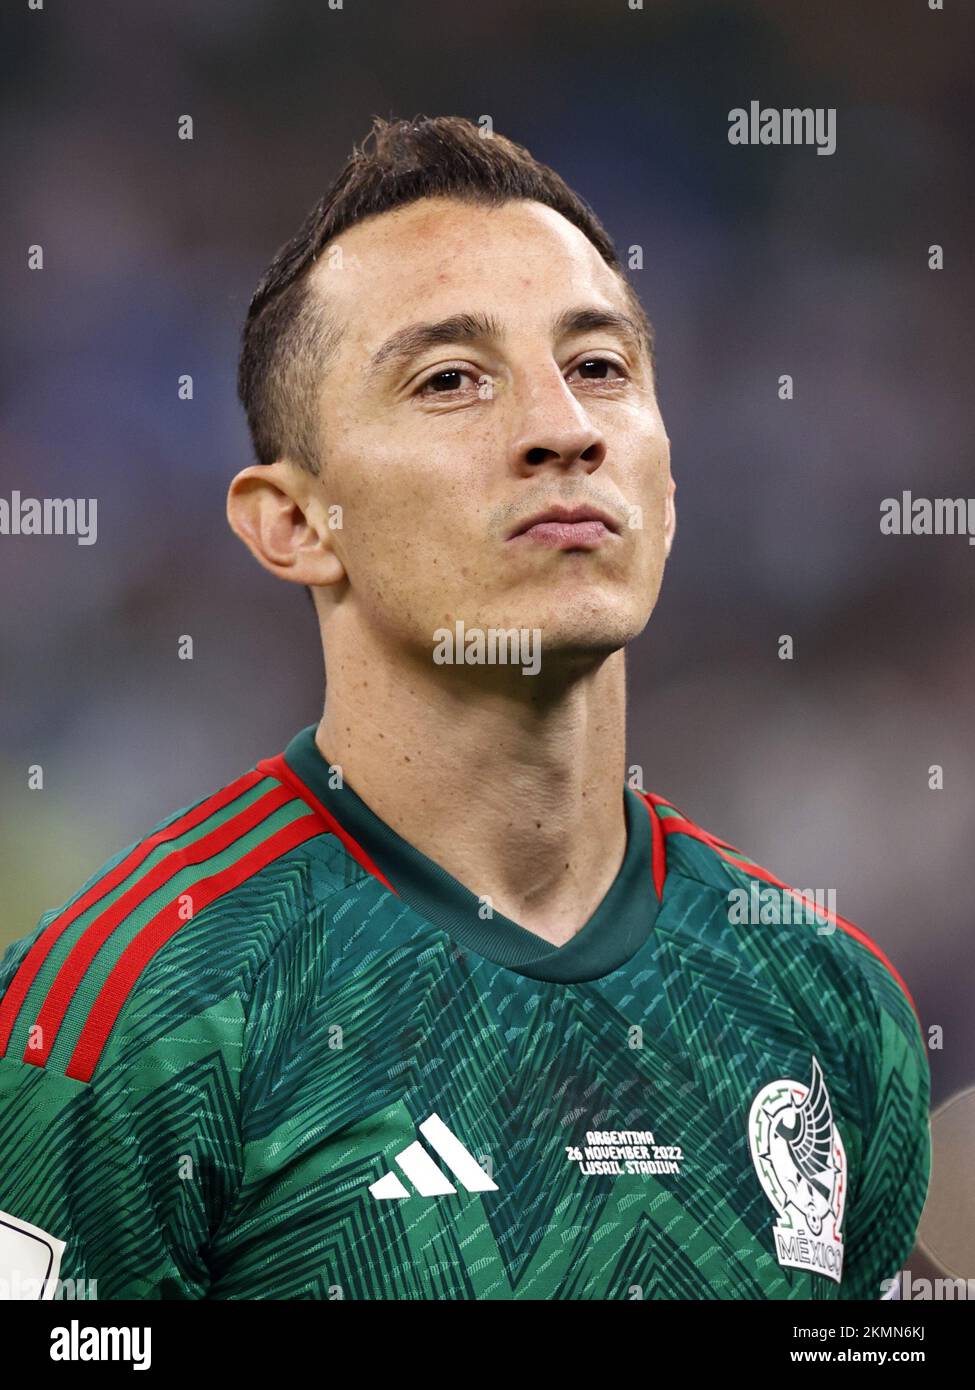 LUSAIL CITY - Andres Guardado of Mexico during the FIFA World Cup Qatar 2022 group C match between Argentina and Mexico at Lusail Stadium on November 26, 2022 in Lusail City, Qatar. AP | Dutch Height | MAURICE OF STONE Stock Photo